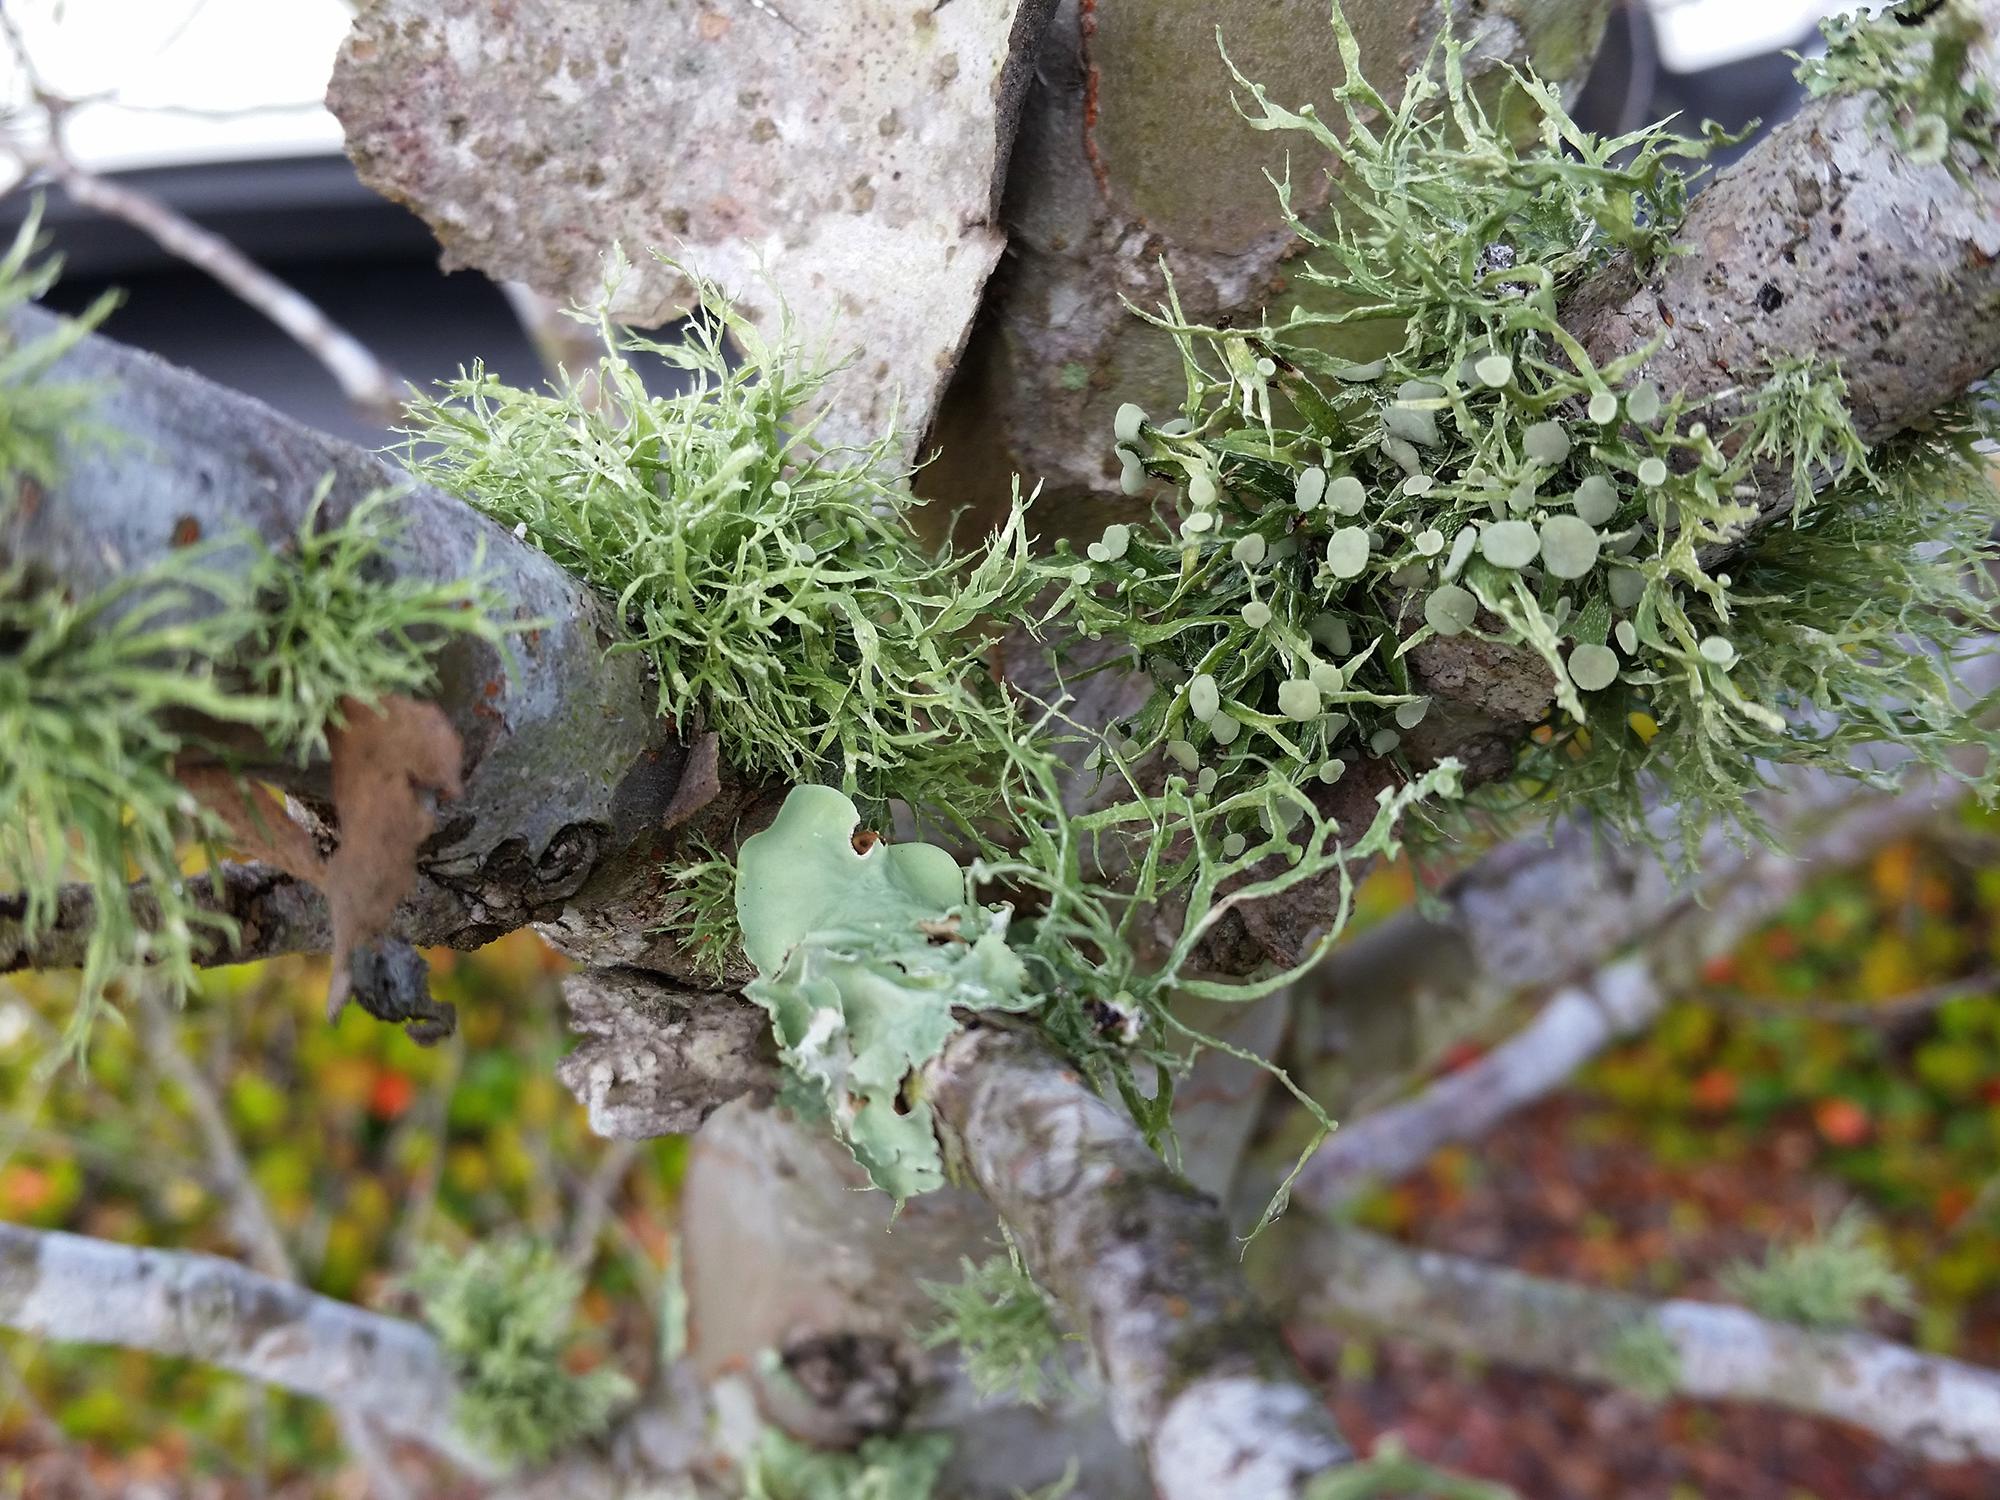 Lichen are an unlikely combination of fungi and algae living in a symbiotic relationship on the bark of plants. This type of lichen resembles highly branched balls of fuzz. (Photo by MSU Extension/Gary Bachman)